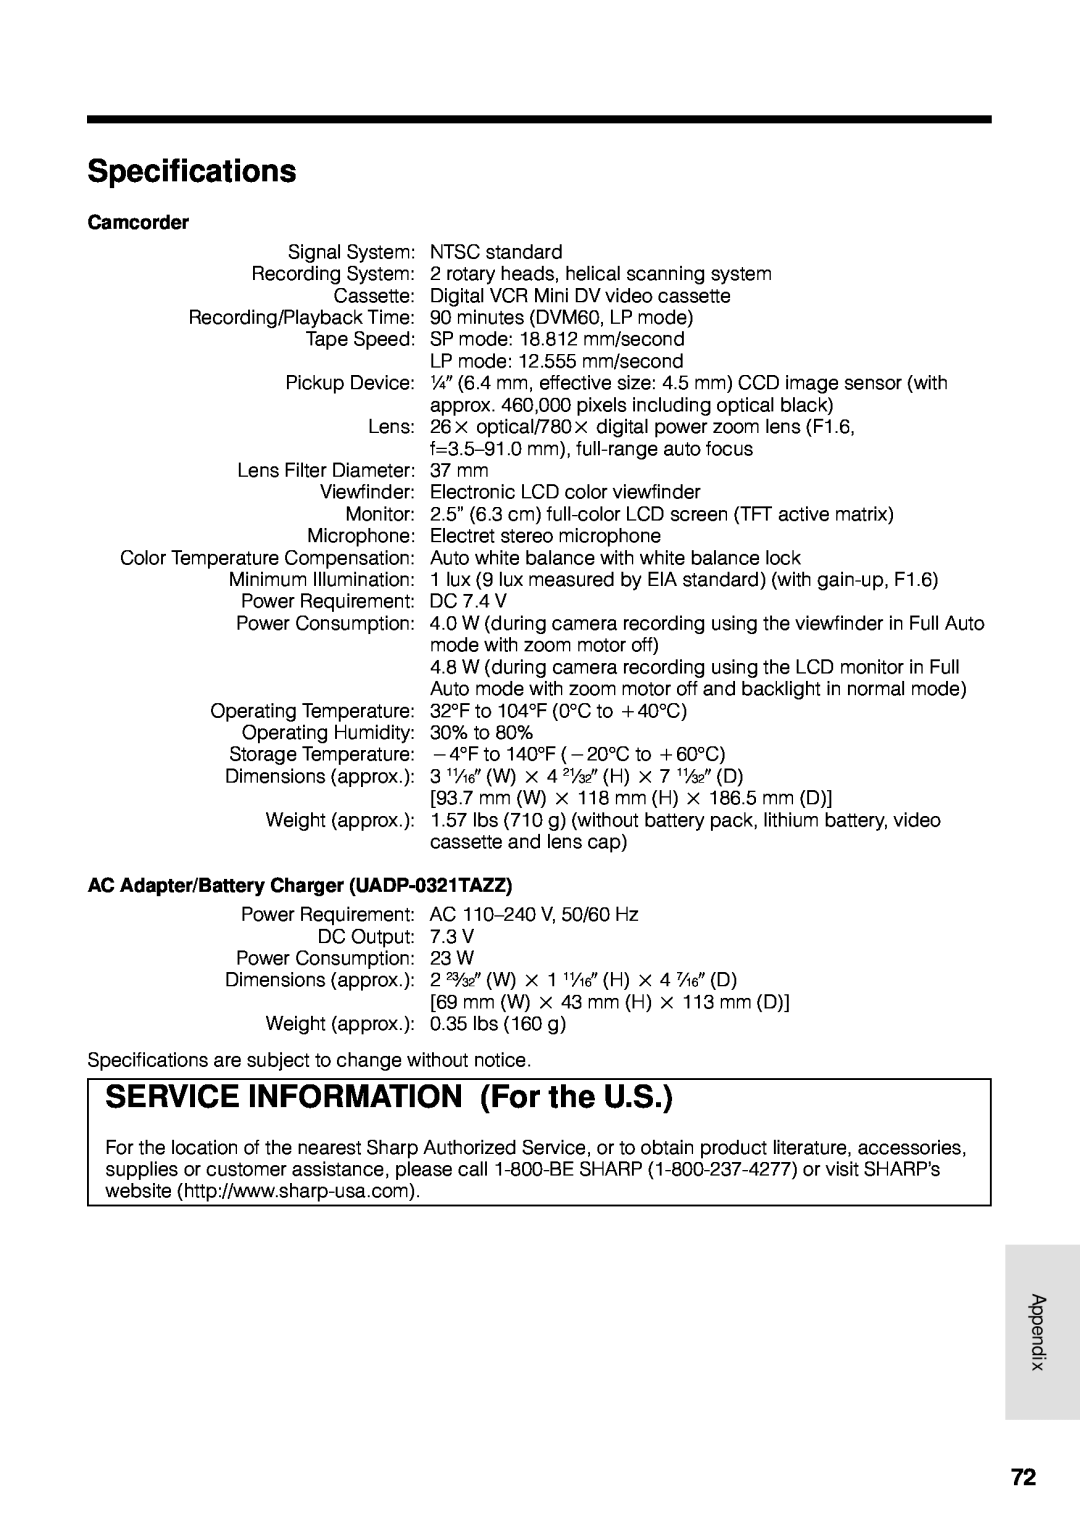 Sharp VL-WD250U operation manual Specifications, SERVICE INFORMATION For the U.S, Appendix, Camcorder 